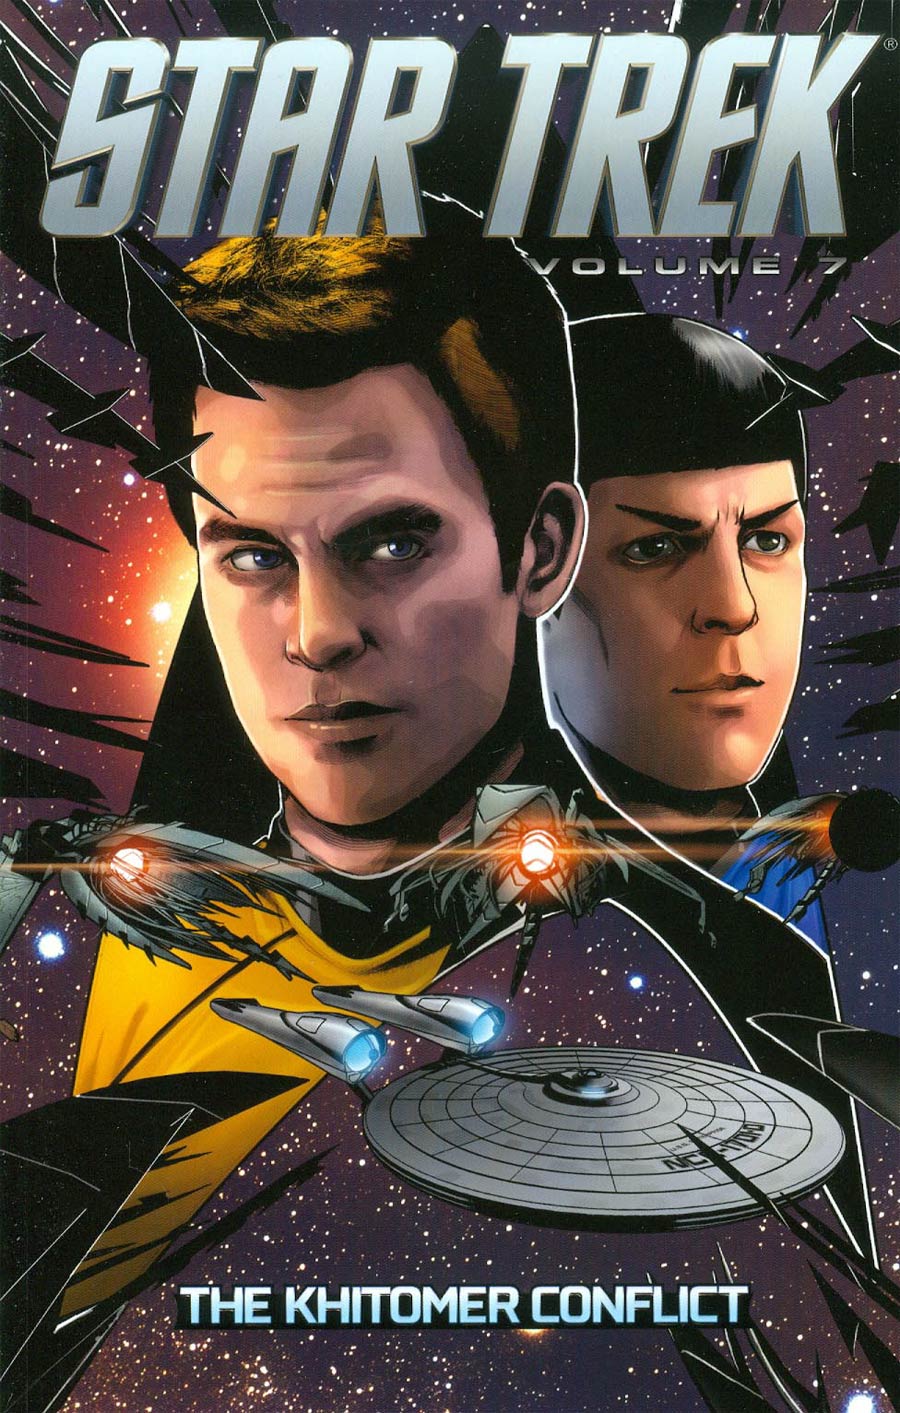 Star Trek Ongoing Vol 7 The Khitomer Conflict TP